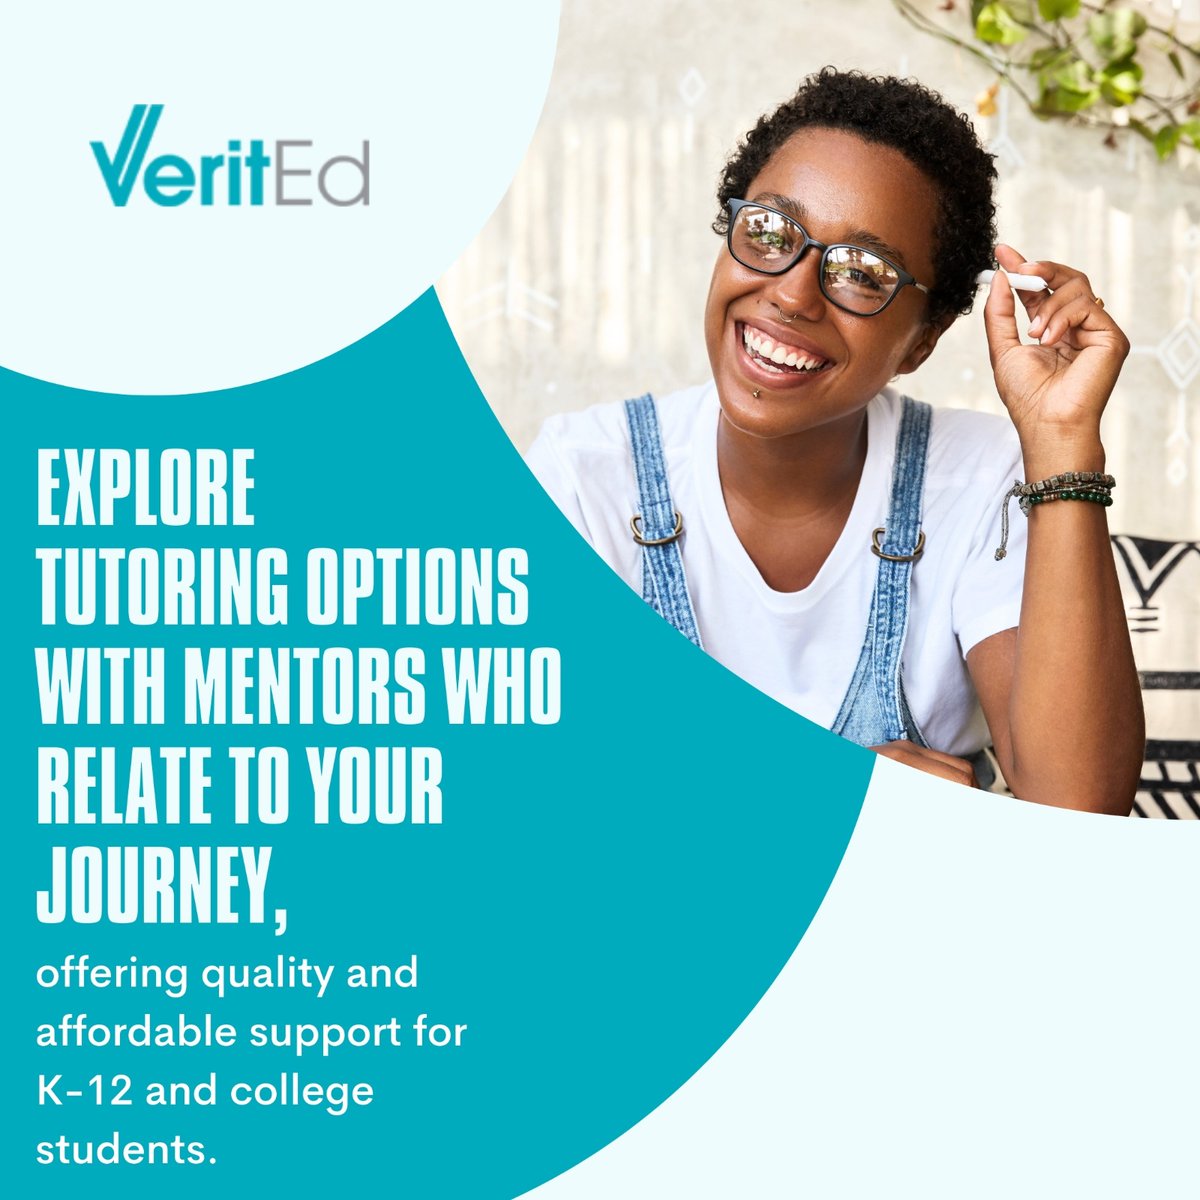 Whether you need help with academics, study skills, or navigating college applications, our mentors are here to guide you every step of the way. 📚
.
.
#VeritEd #ElevateEducation #PersonalizedTutoring #Mentorship #HighAchievers #QualityEducation #AffordableTutoring